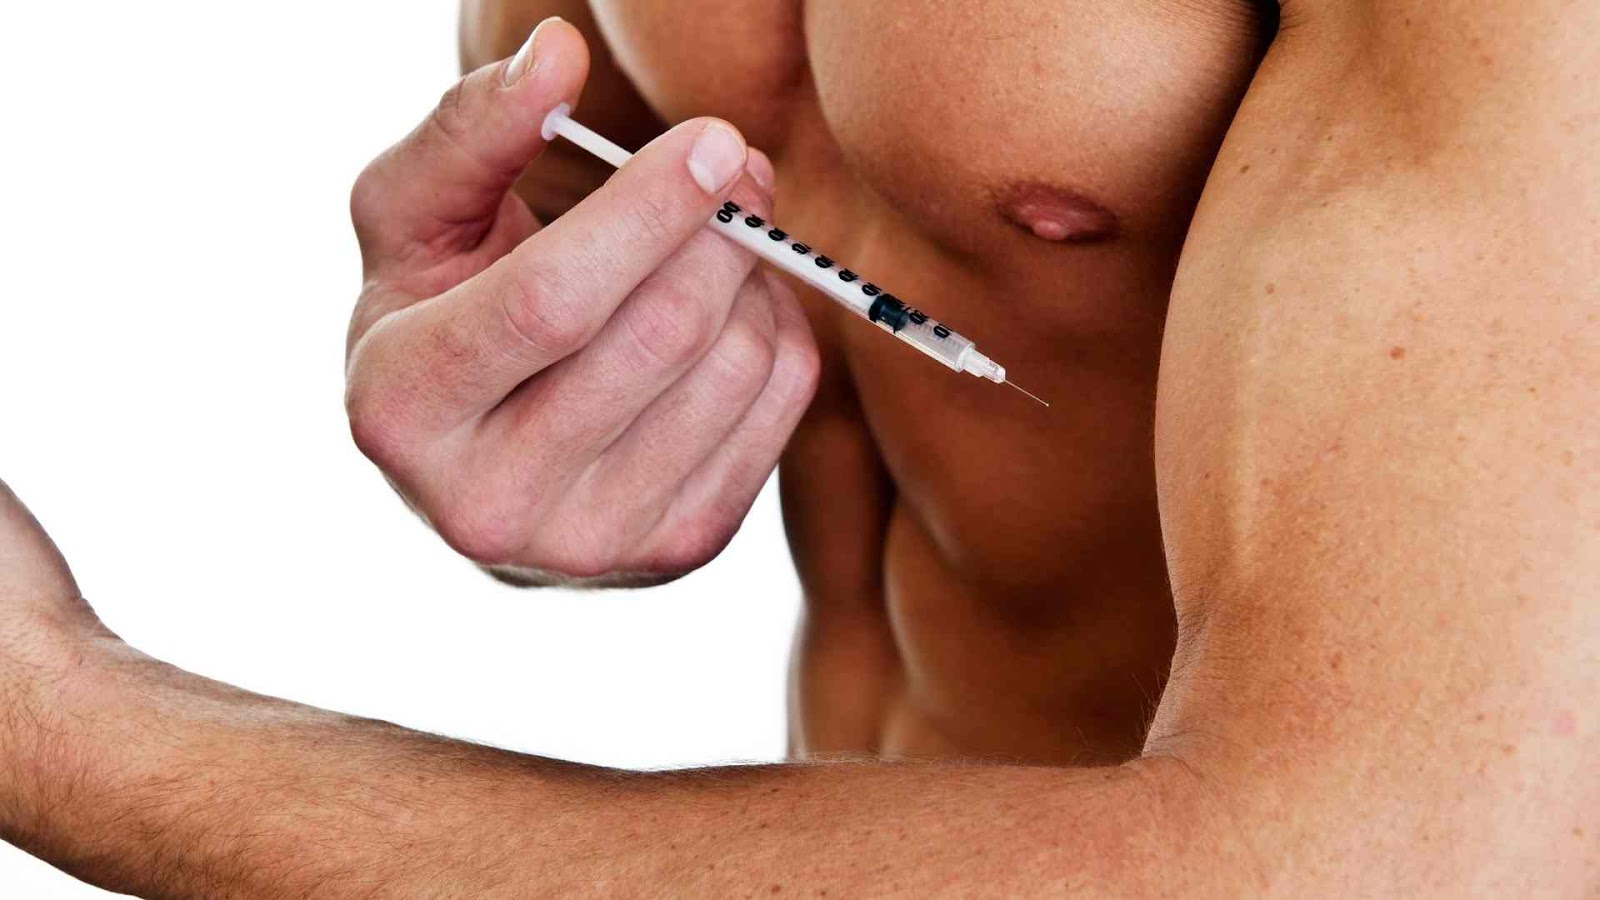 Topical steroids like hydrocortisone are not the same as anabolic steroids